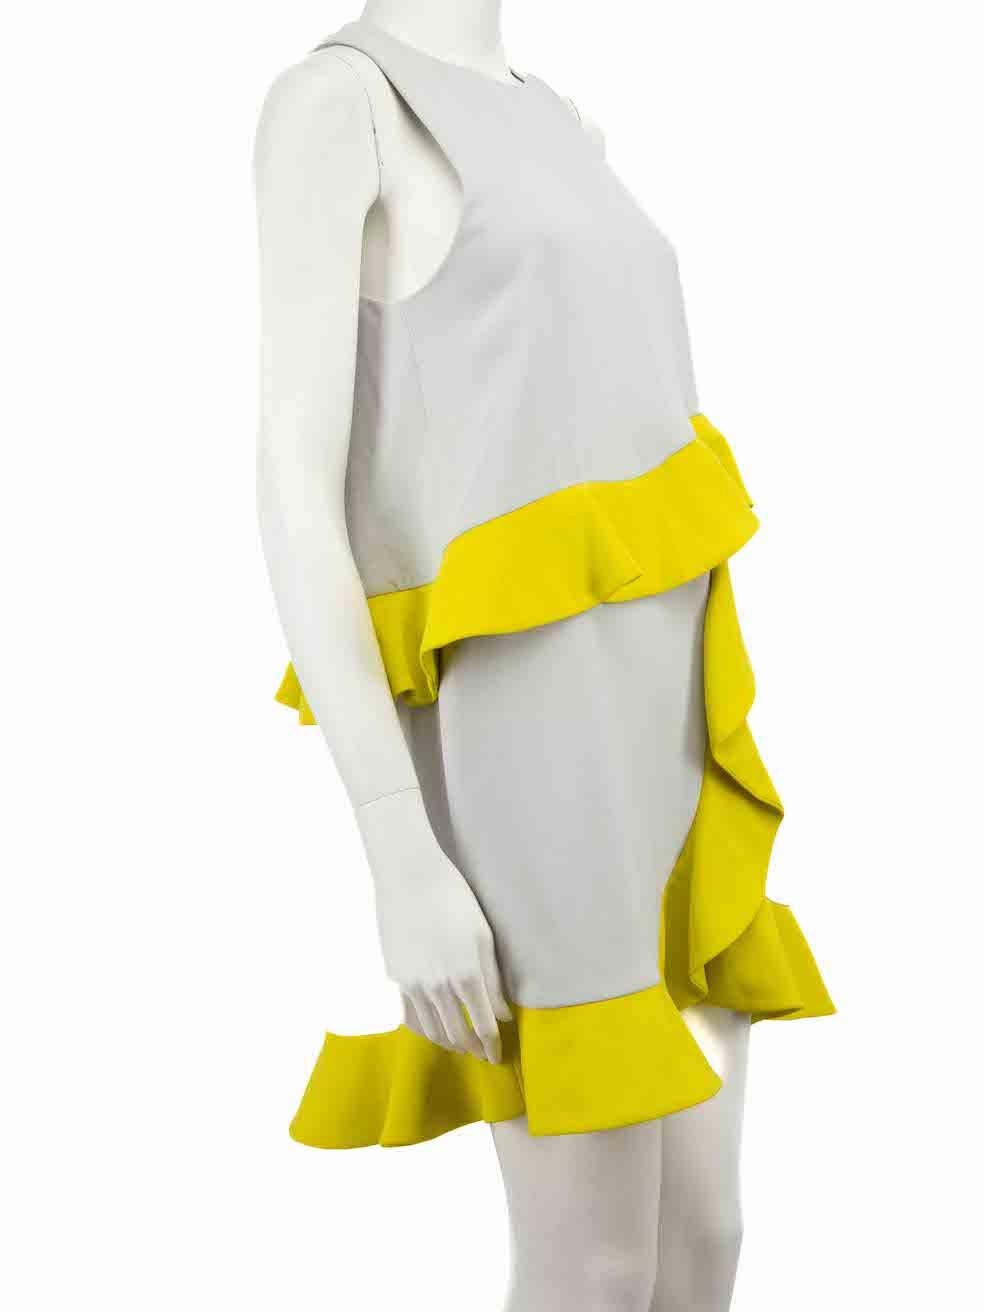 CONDITION is Very good. Hardly any visible wear to dress is evident on this used MSGM designer resale item.
 
 Details
 Grey
 Polyester
 Mini dress
 Round neckline
 Yellow contrast ruffles accent
 Sleeveless
 Back zip closure with hook and eye
 
 
